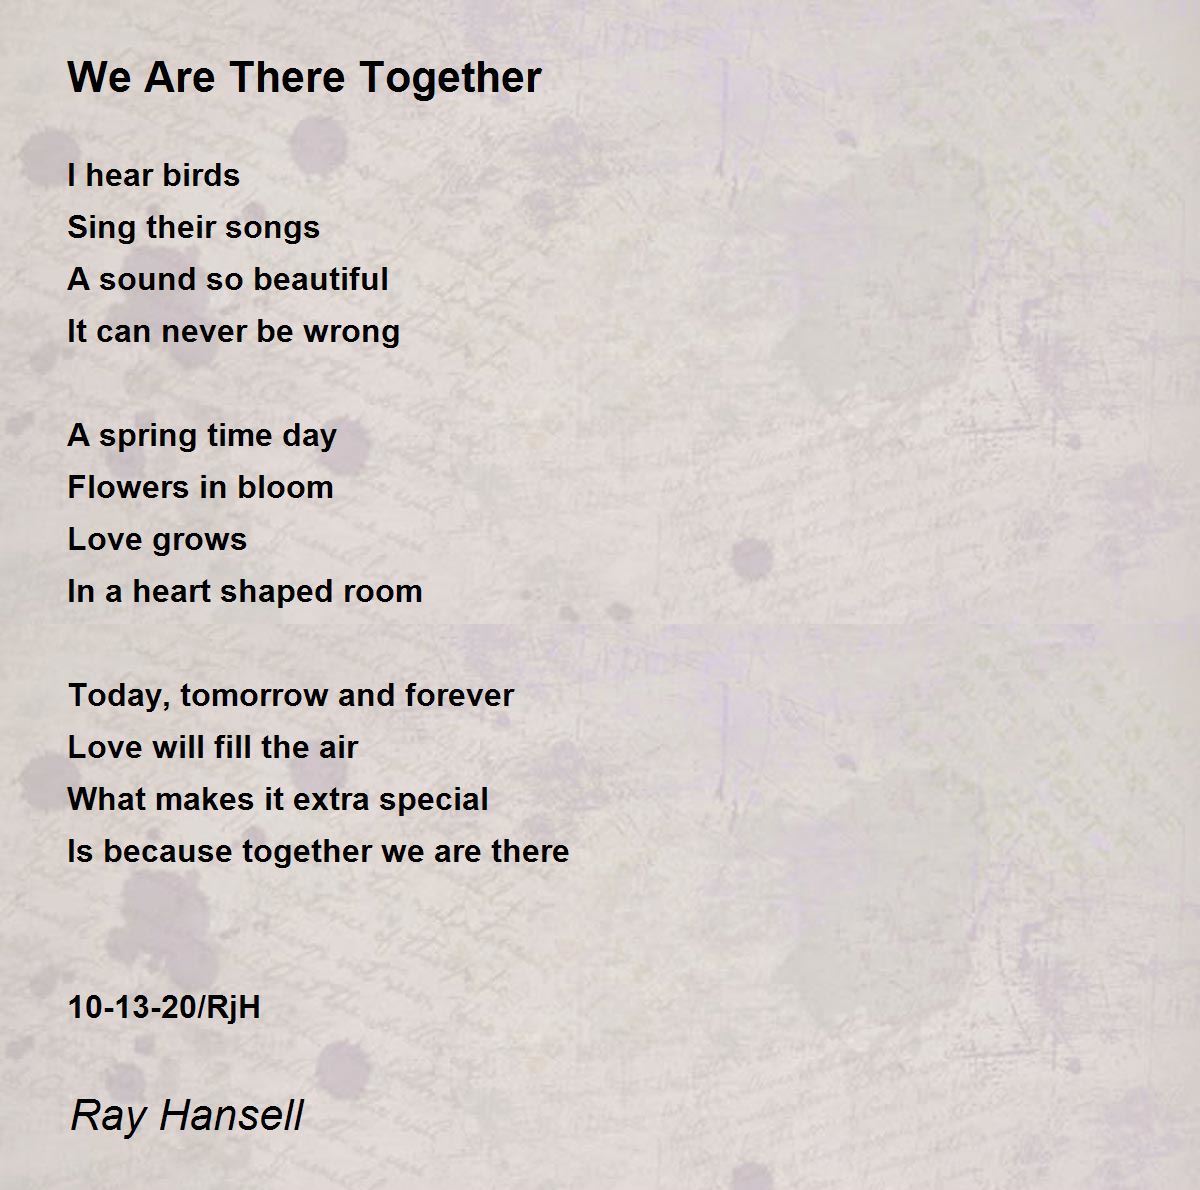 we were there together download free